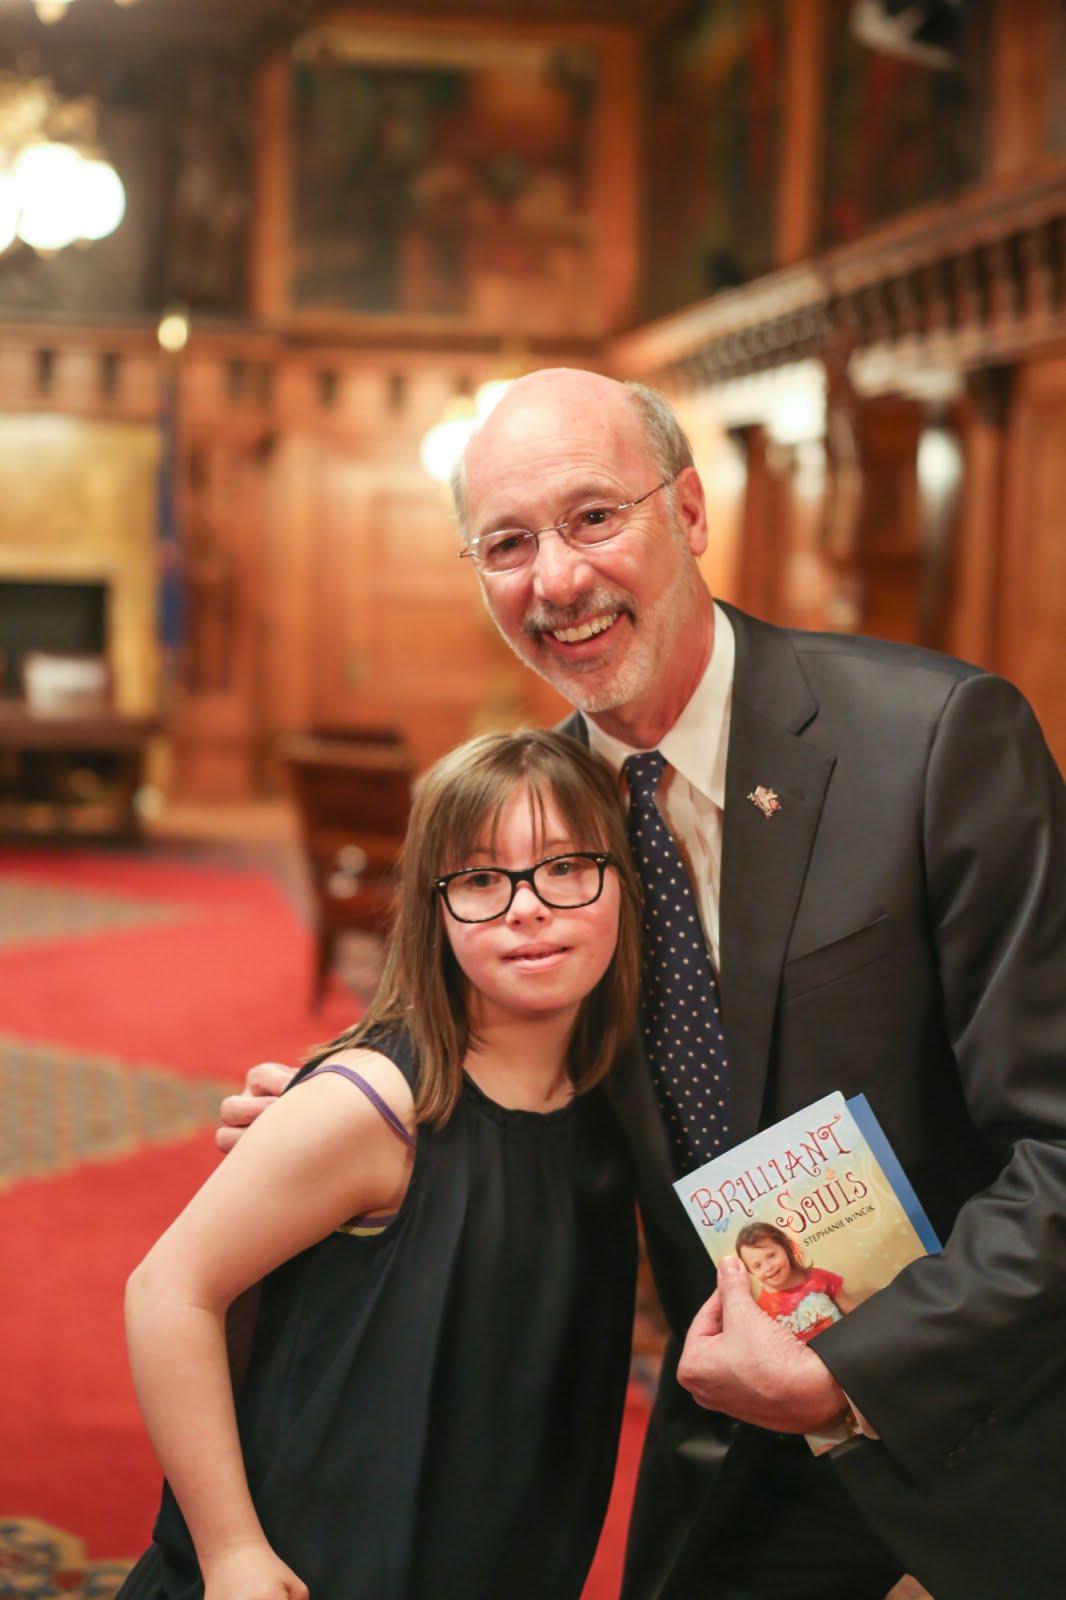 Chloe meets with PA Governor Wolf and gives him the SICC Report